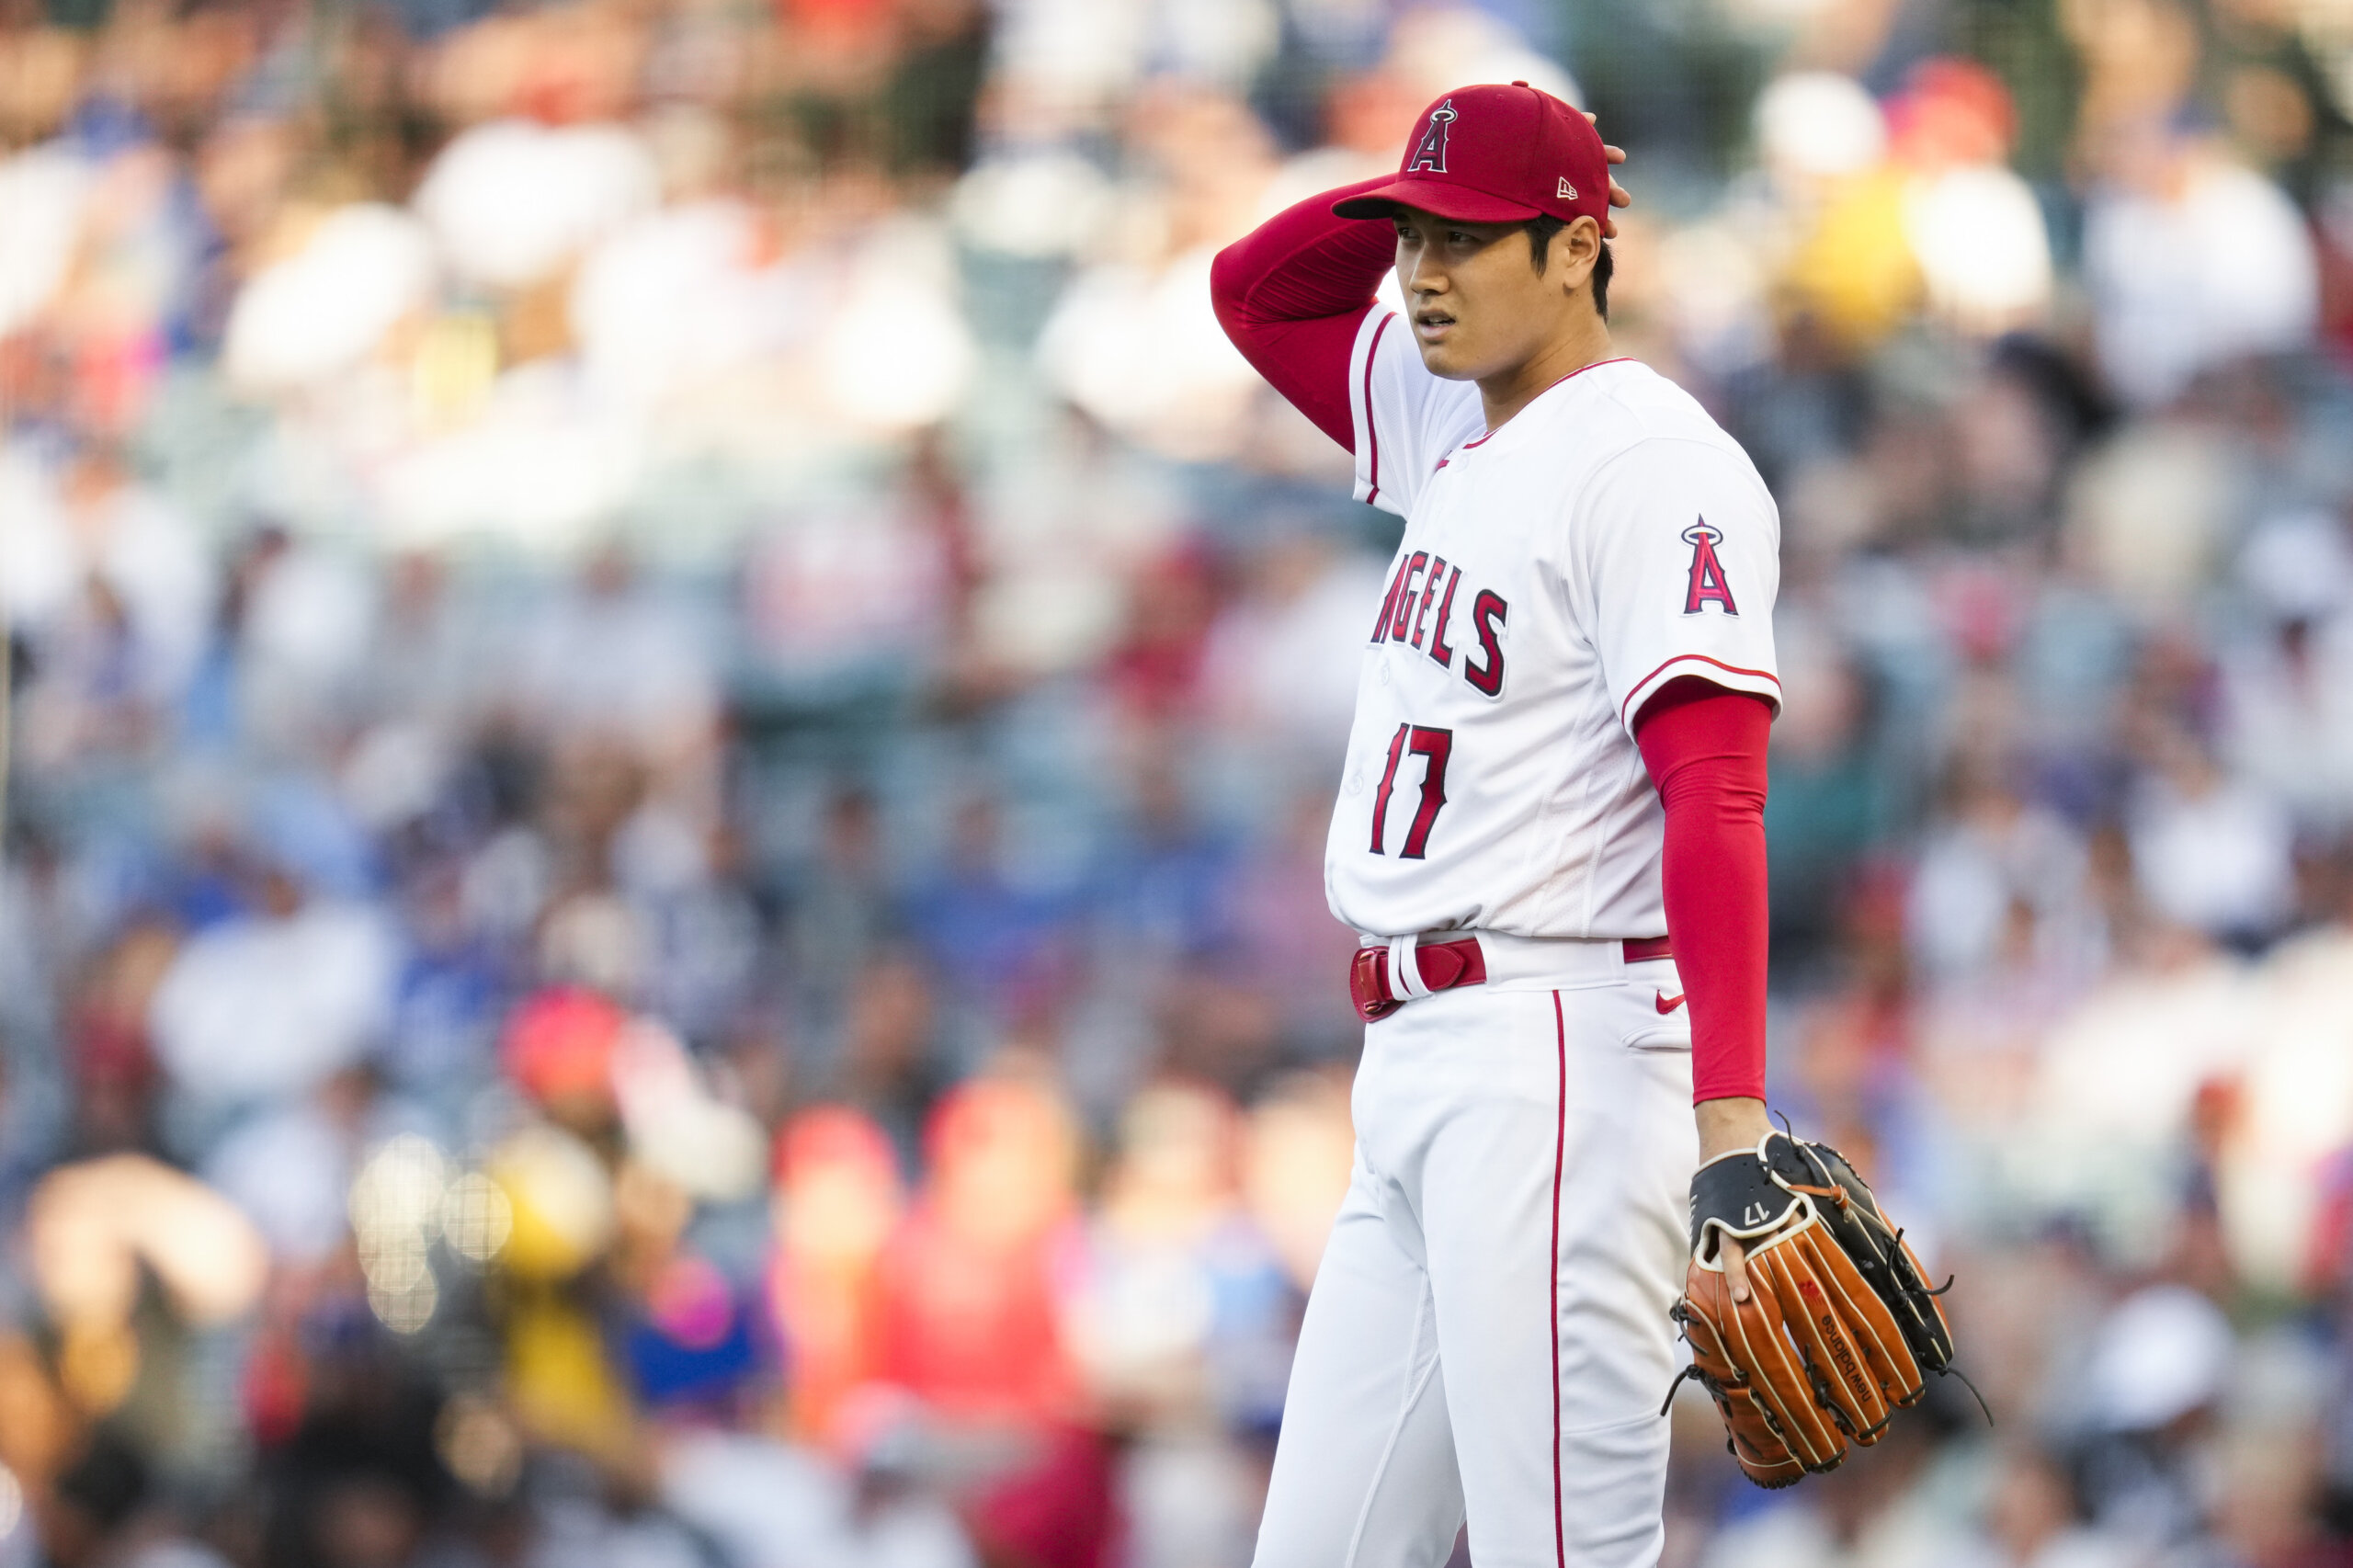 MLB: Shohei Ohtani strikes out 11, Angels beat Royals 2-0 - The